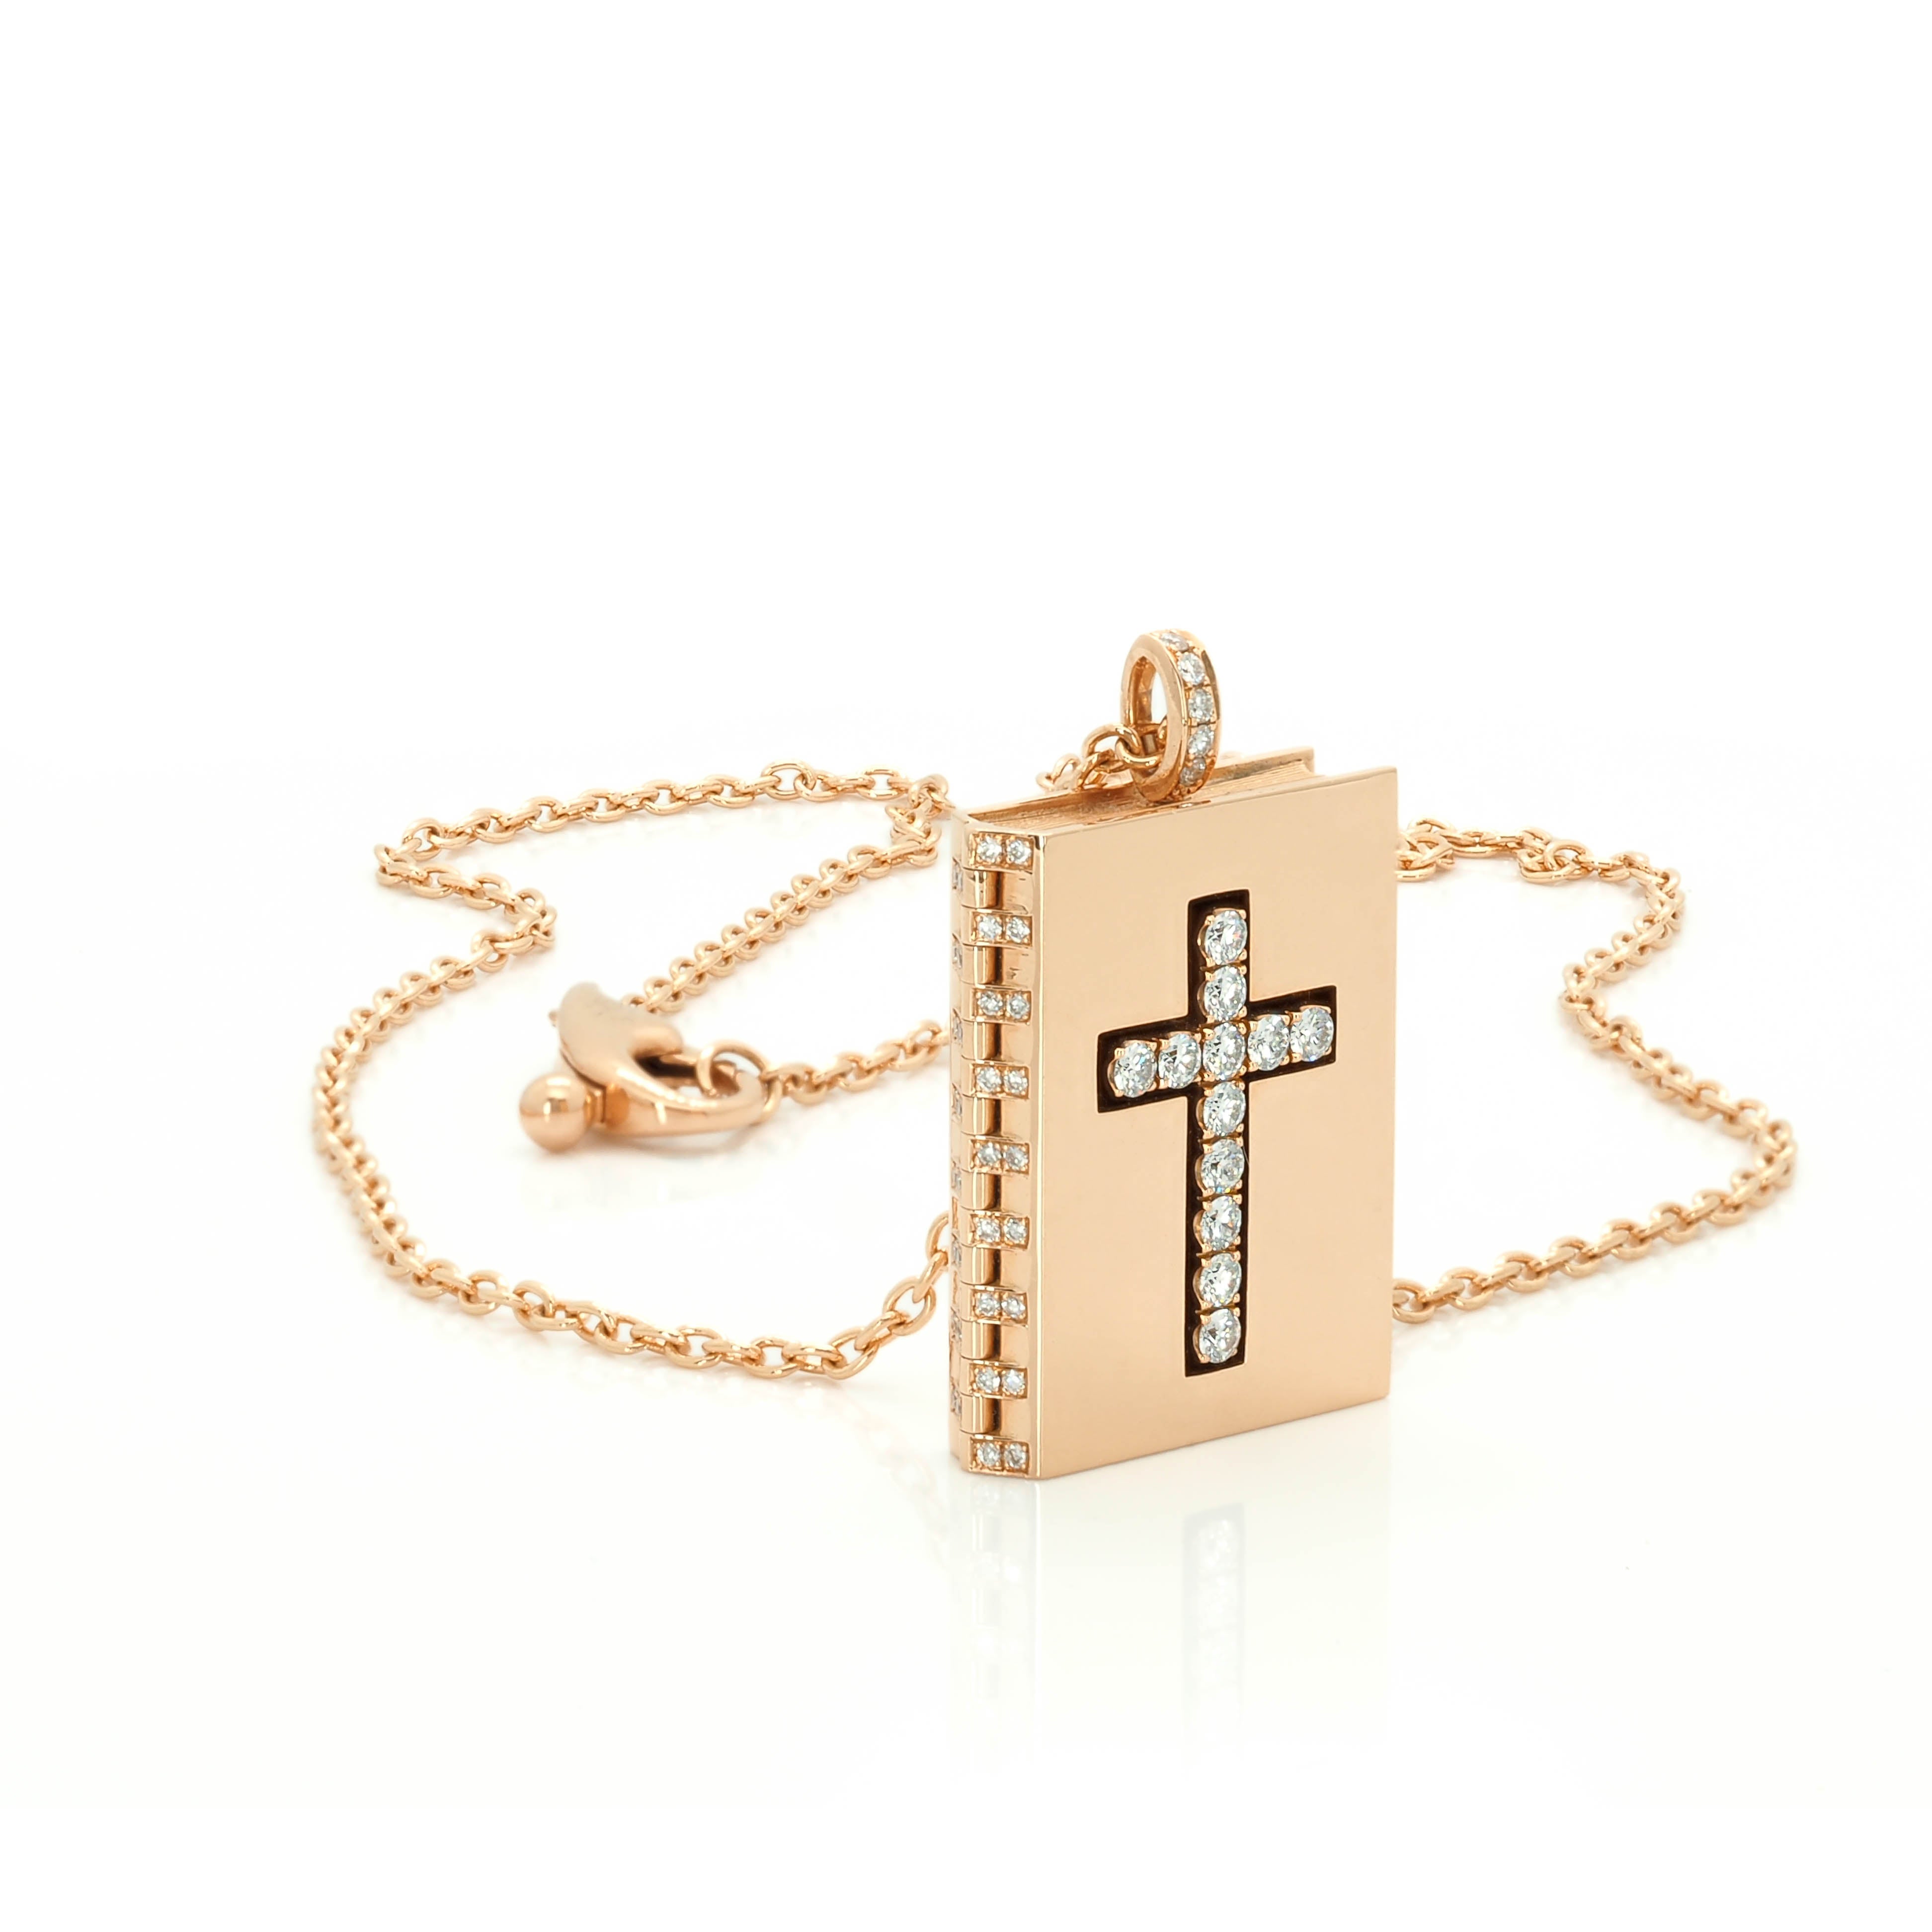 Golden Cross Book Necklace with Diamonds